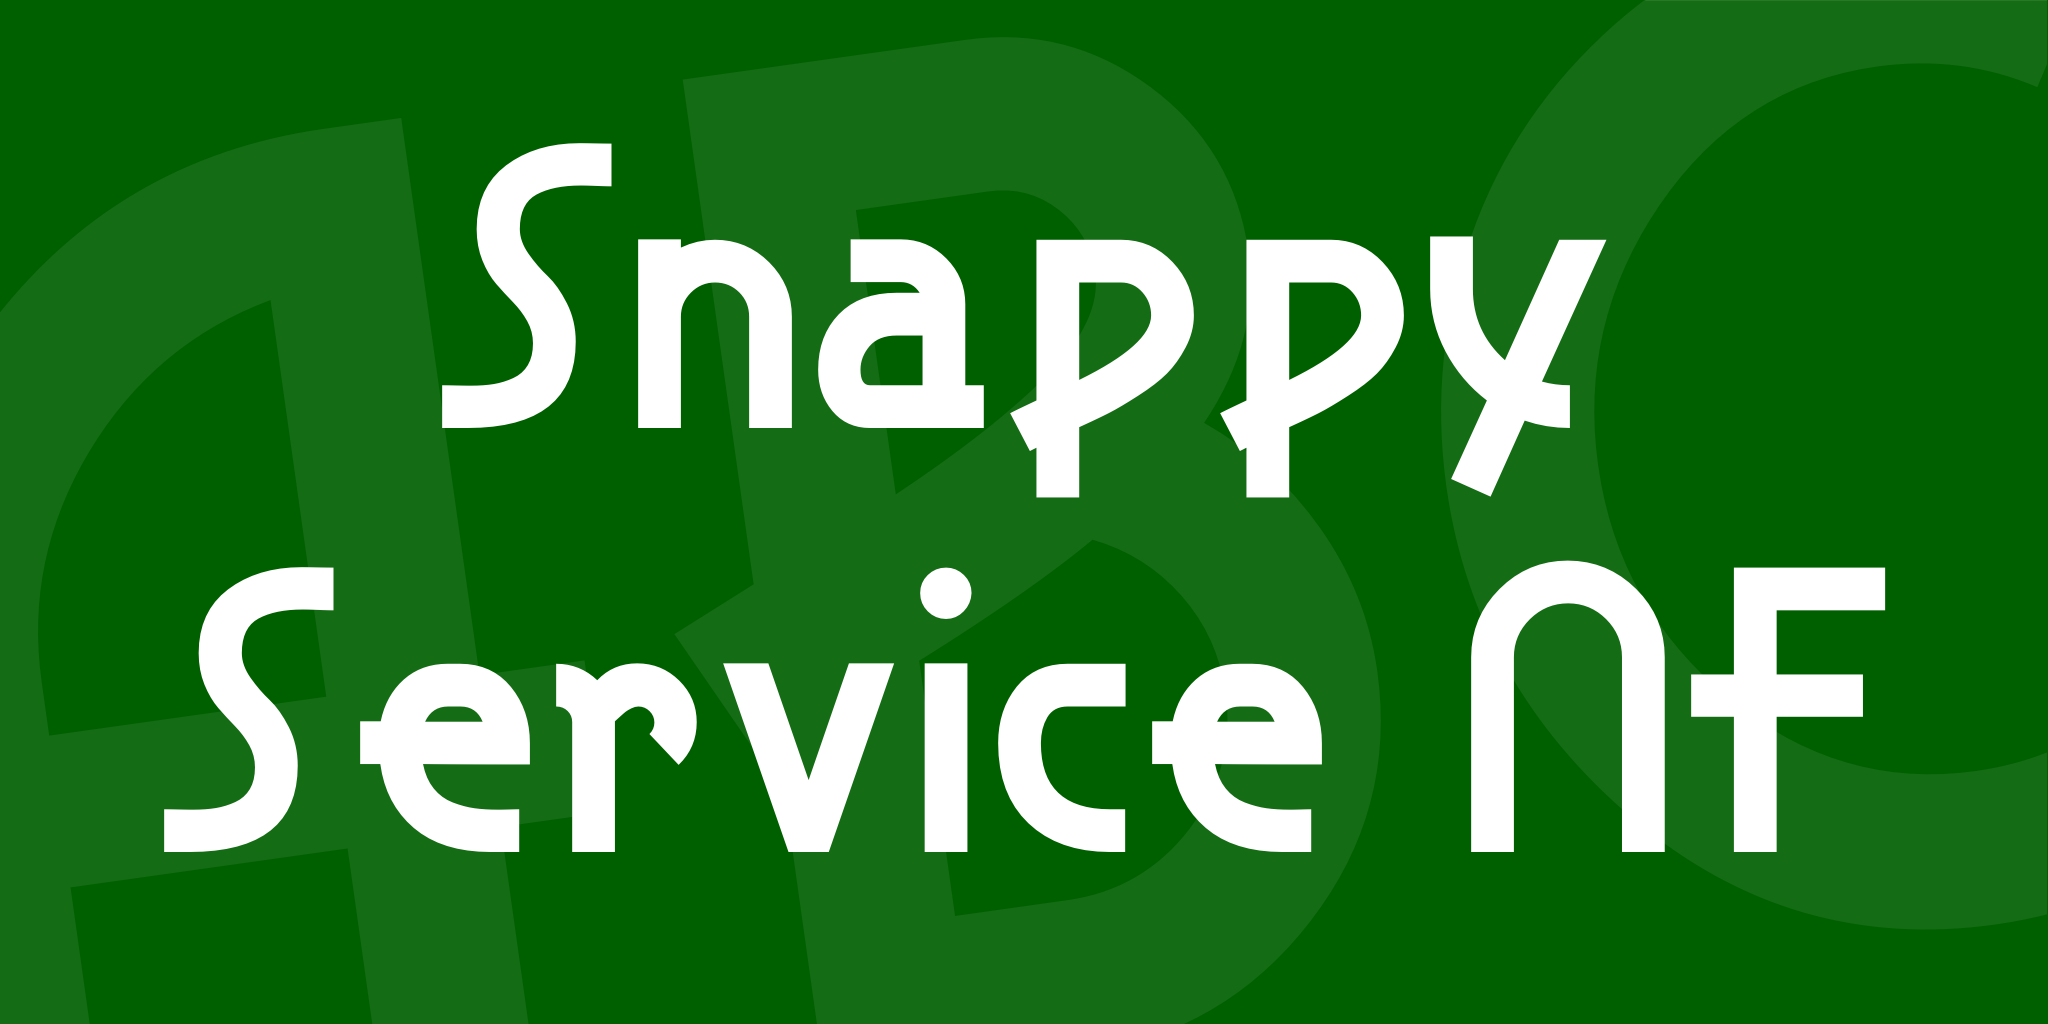 Snappy Service Nf